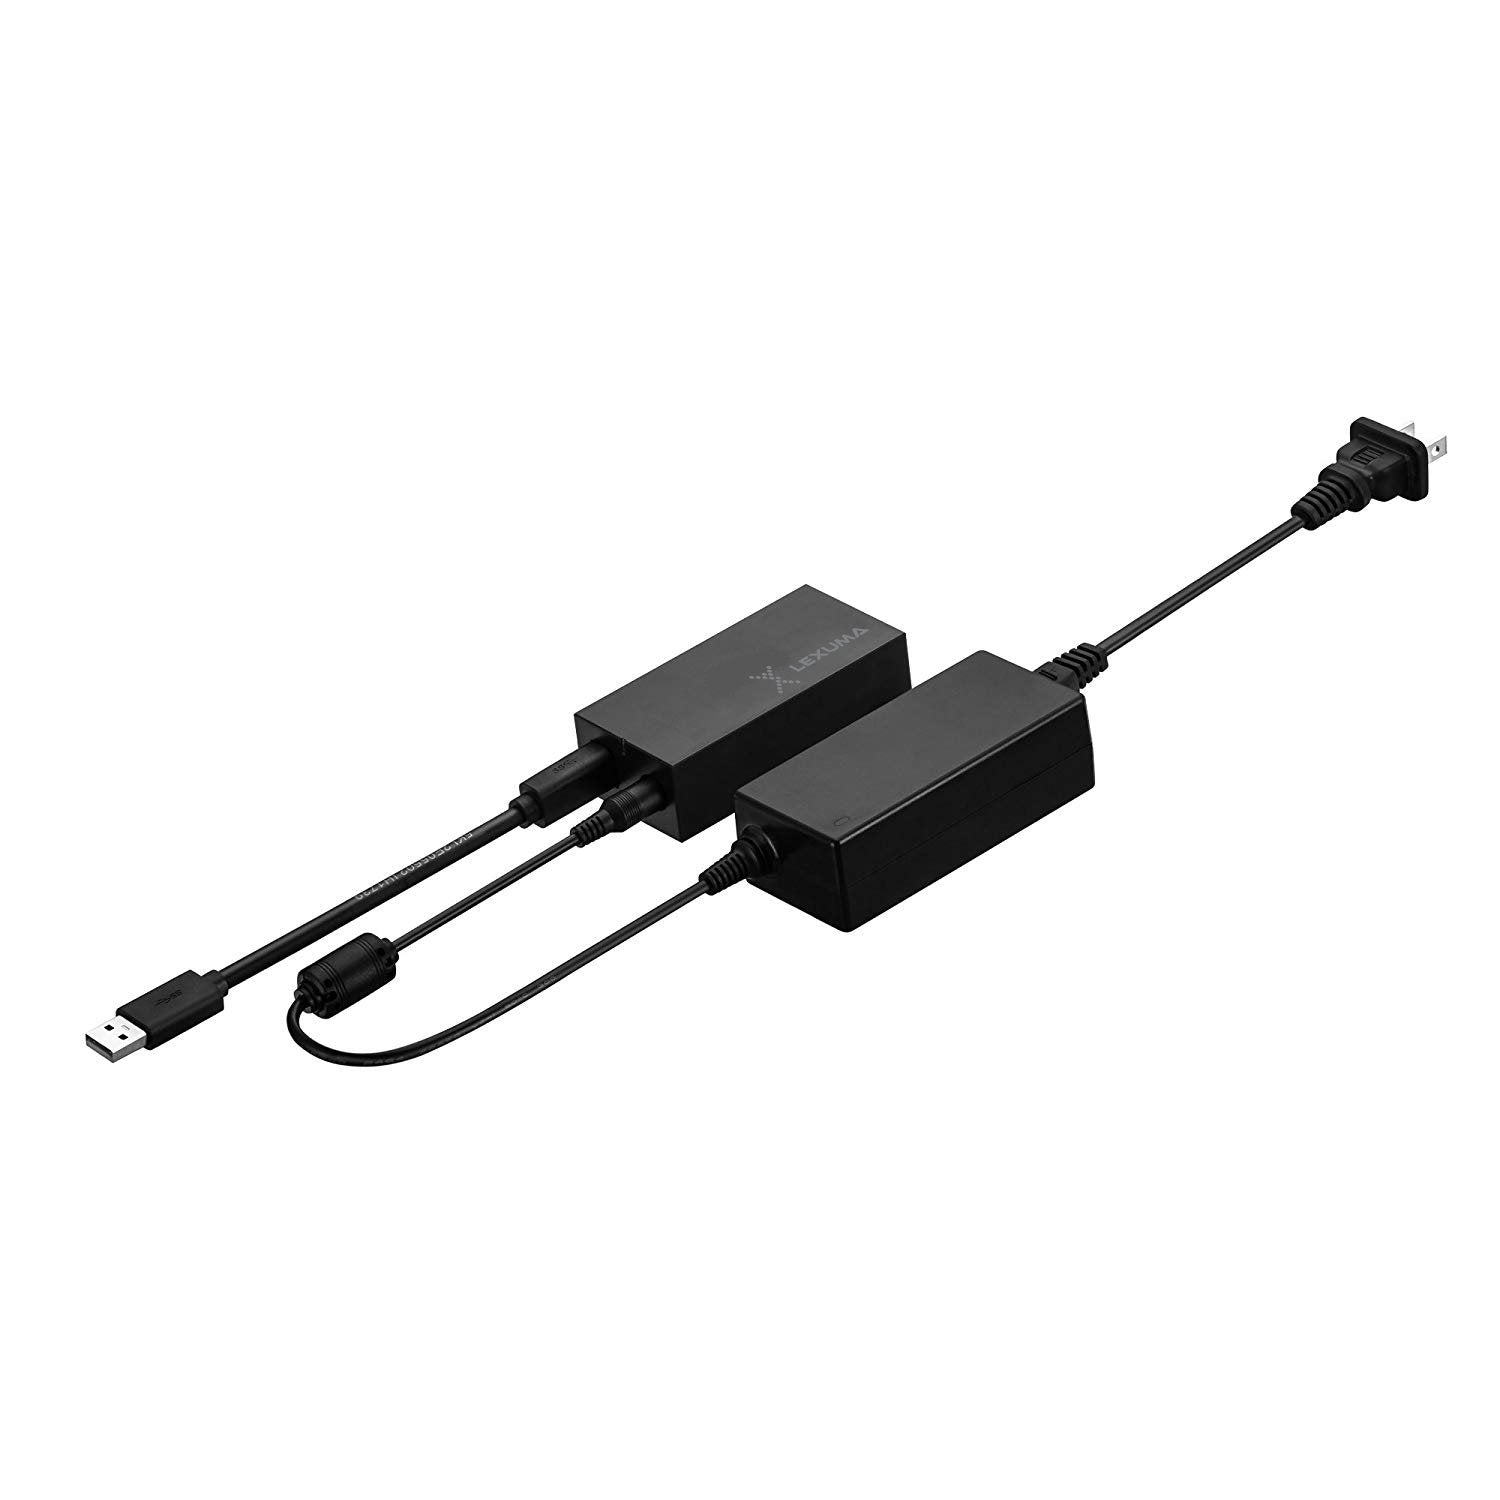 Kinect Adapter for Xbox One S, Xbox One X and Window 10 PC by Lexuma - port